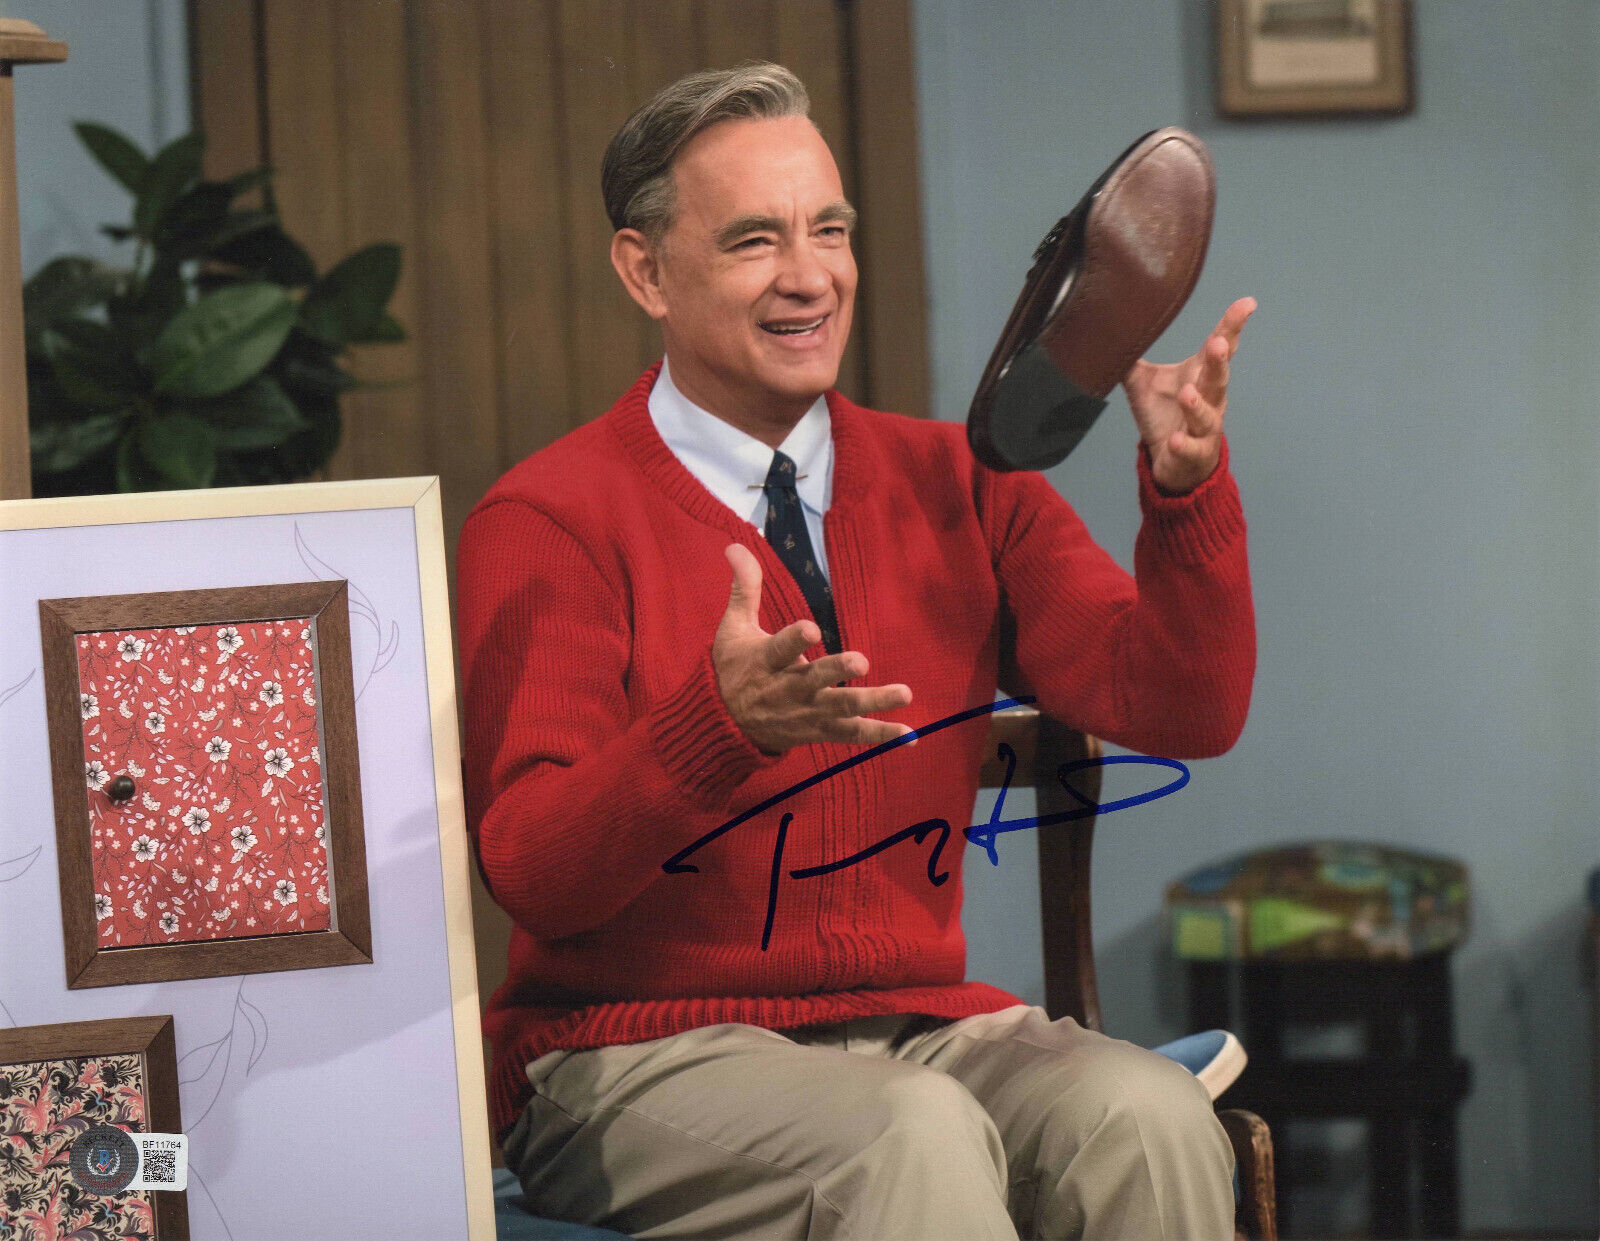 TOM HANKS SIGNED AUTOGRAPH A BEAUTIFUL DAY IN THE NEIGHBORHOOD 11X14 PHOTO BAS 